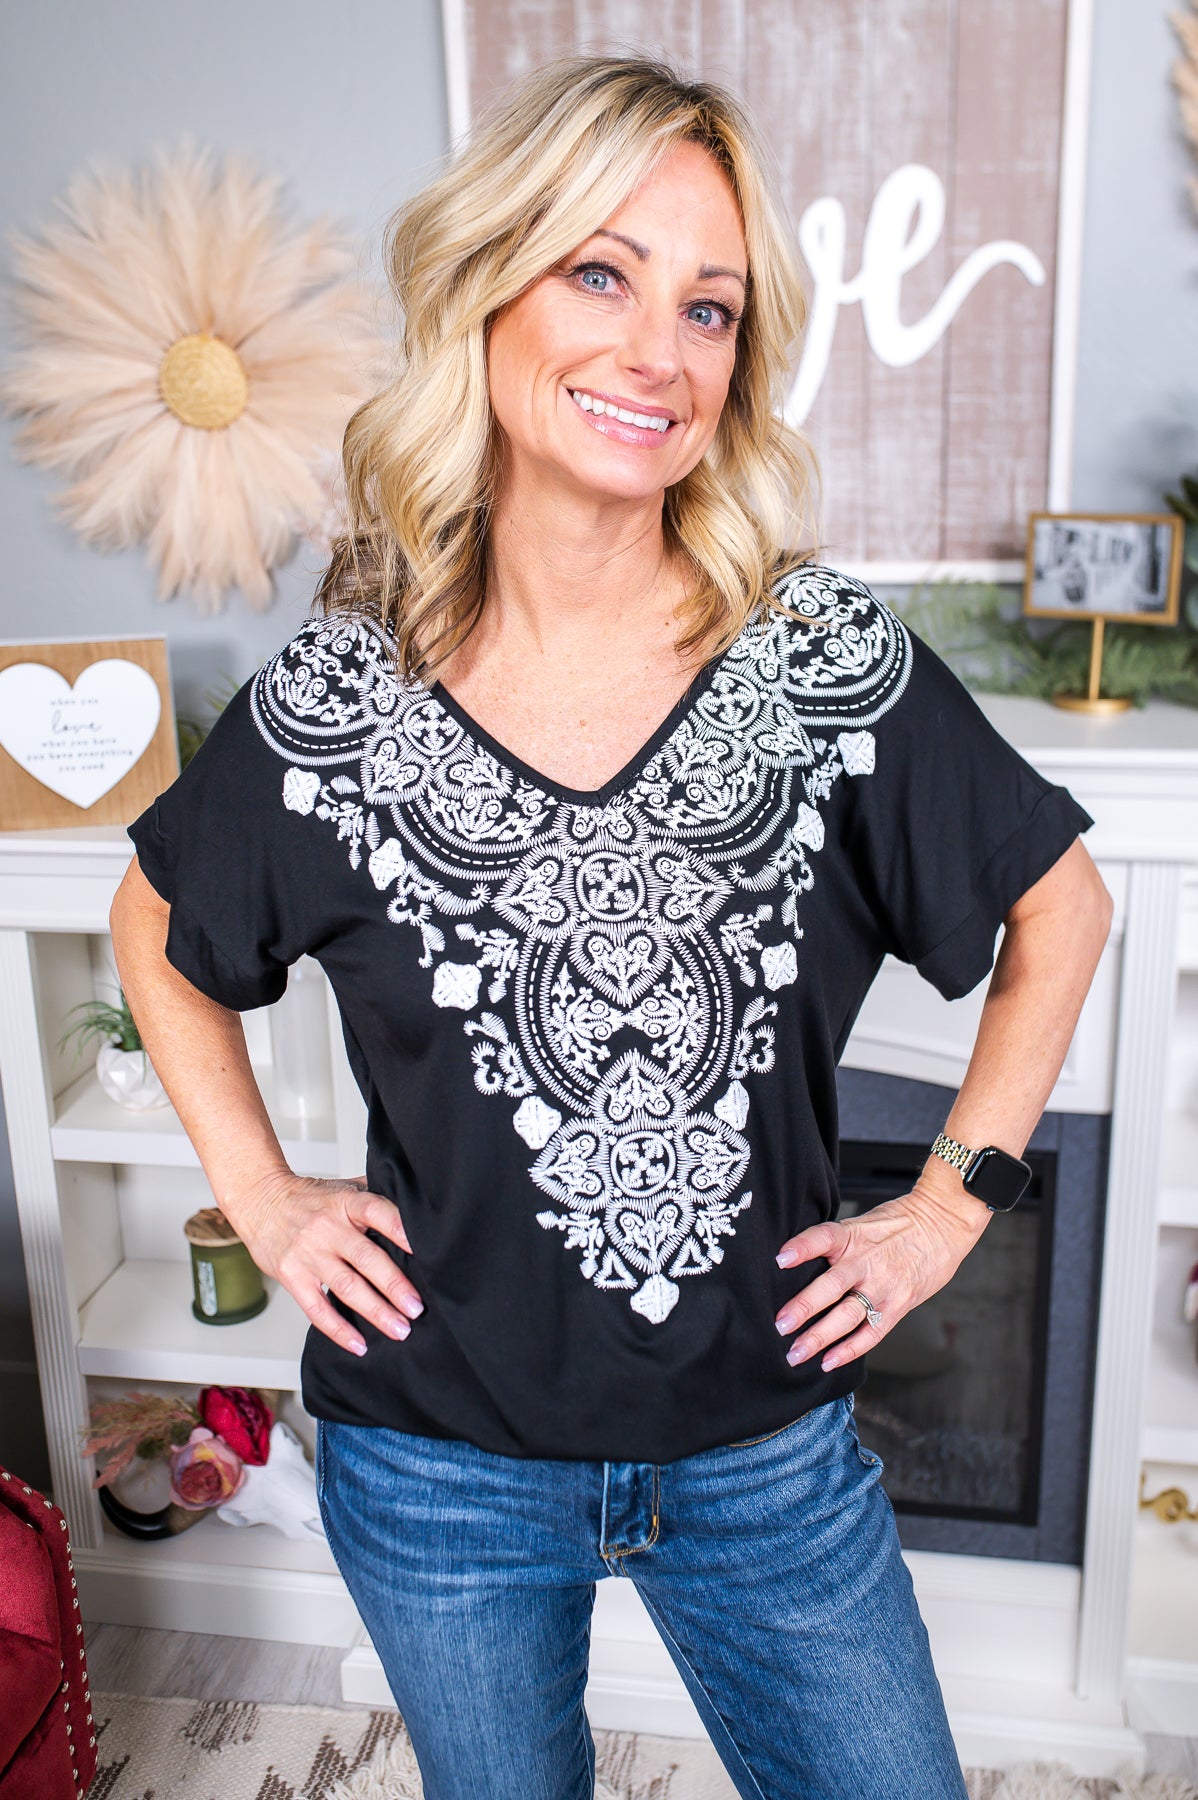 Endless Daydreaming Black/White Printed High-Low V Neck Top - T6517BK